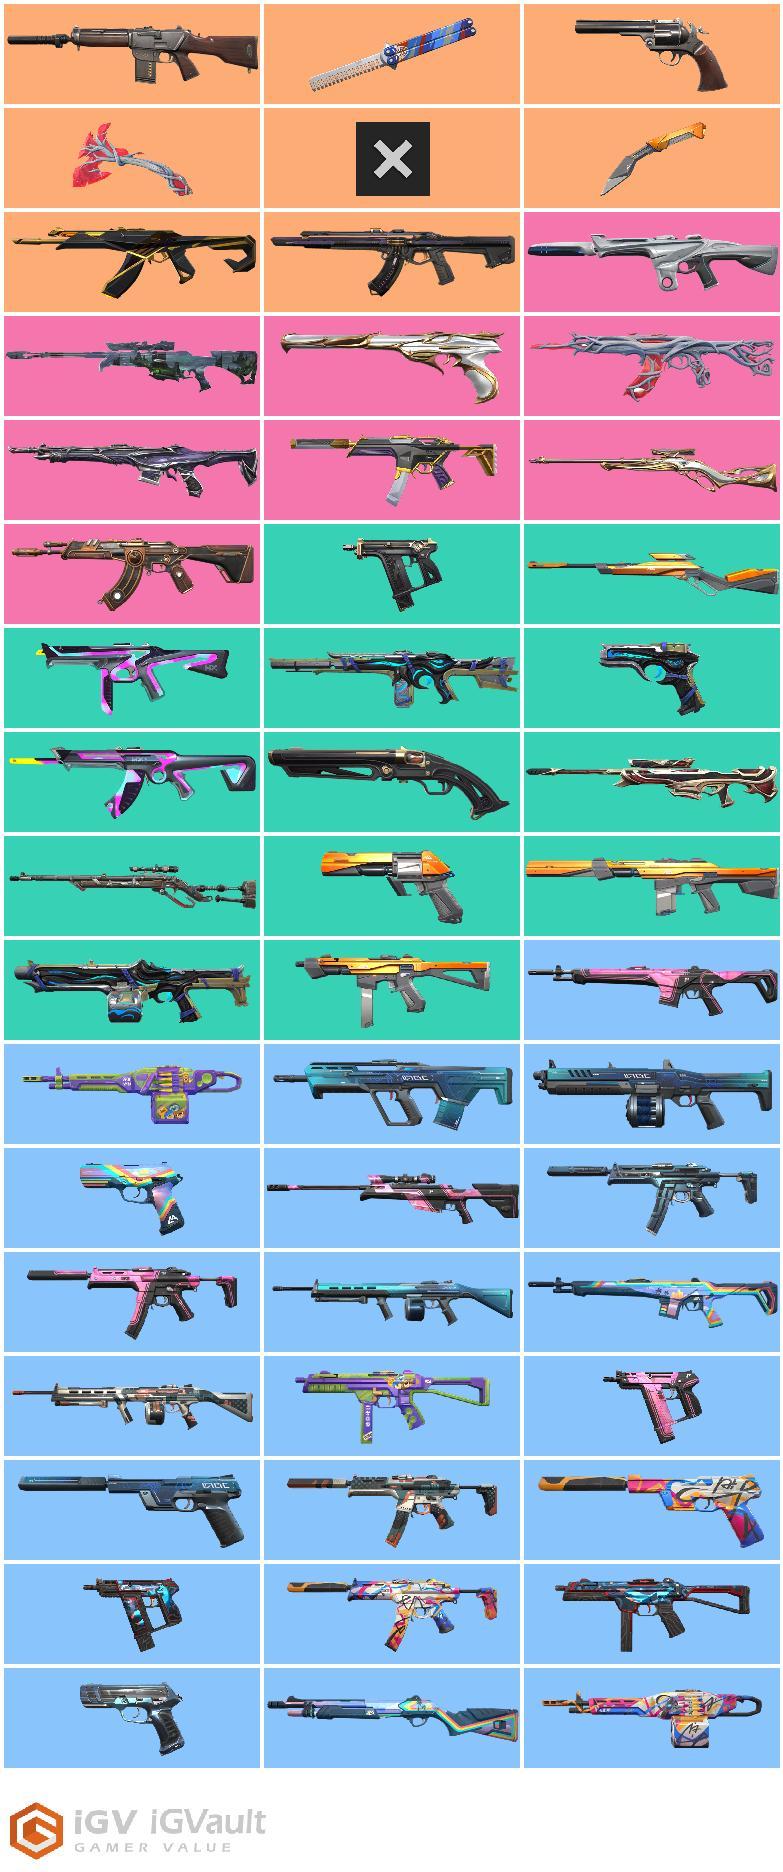 EUROPE / 51 SKINS / Neo Frontier Phantom+Chaos Vandal + 4 RARE KNIVES (Gaia's Wrath) / MAIL (FULL ACCESS) / LUX Quality 